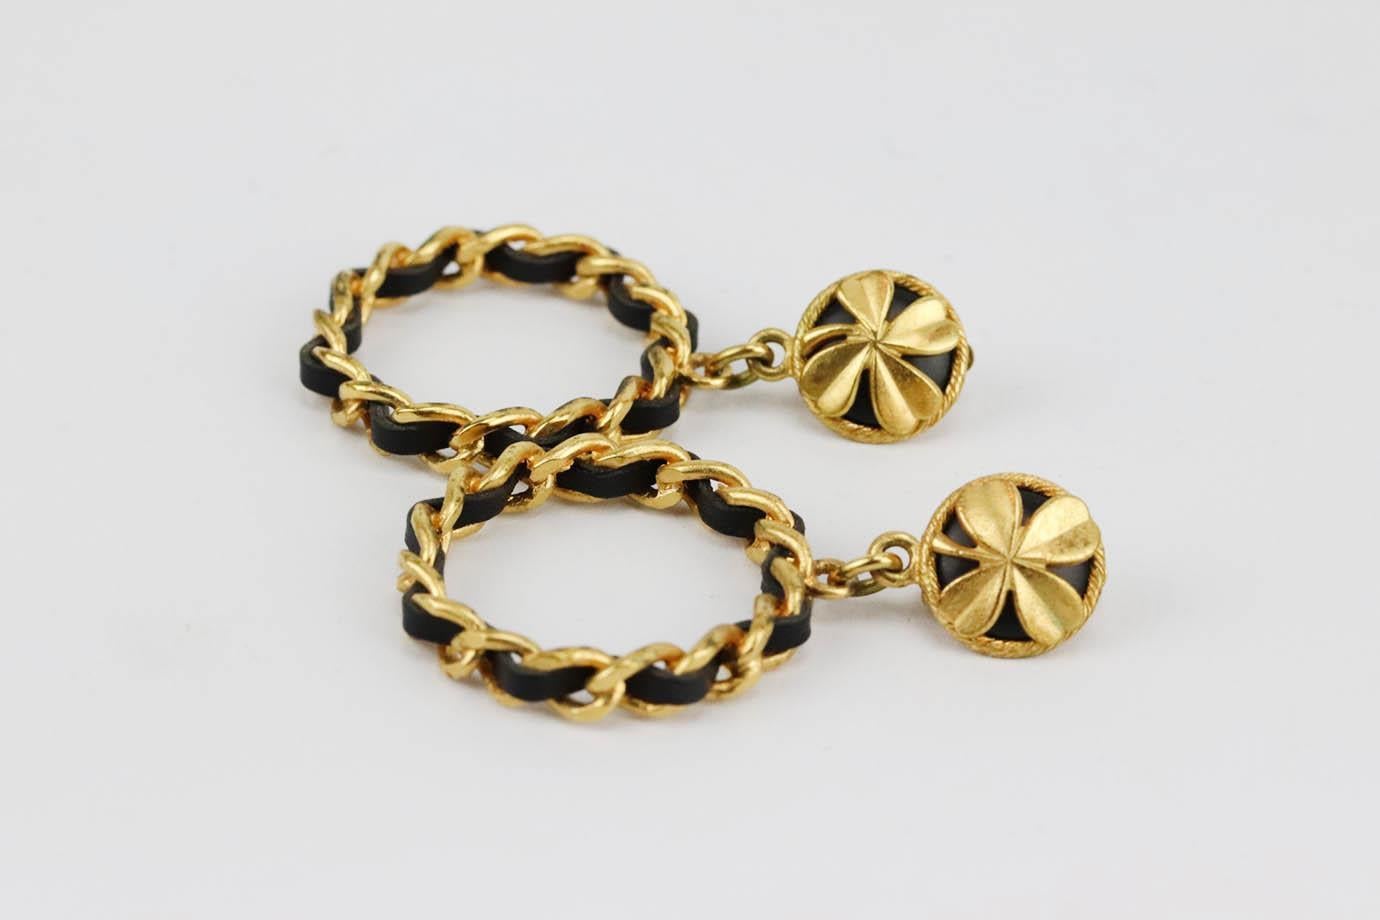 Chanel 1994 Vintage clover hoop Clip on earrings. Black and gold. Clip on fastening. Does not come with box or dustbag. Length: 2.5 in. Width: 1.5 in
